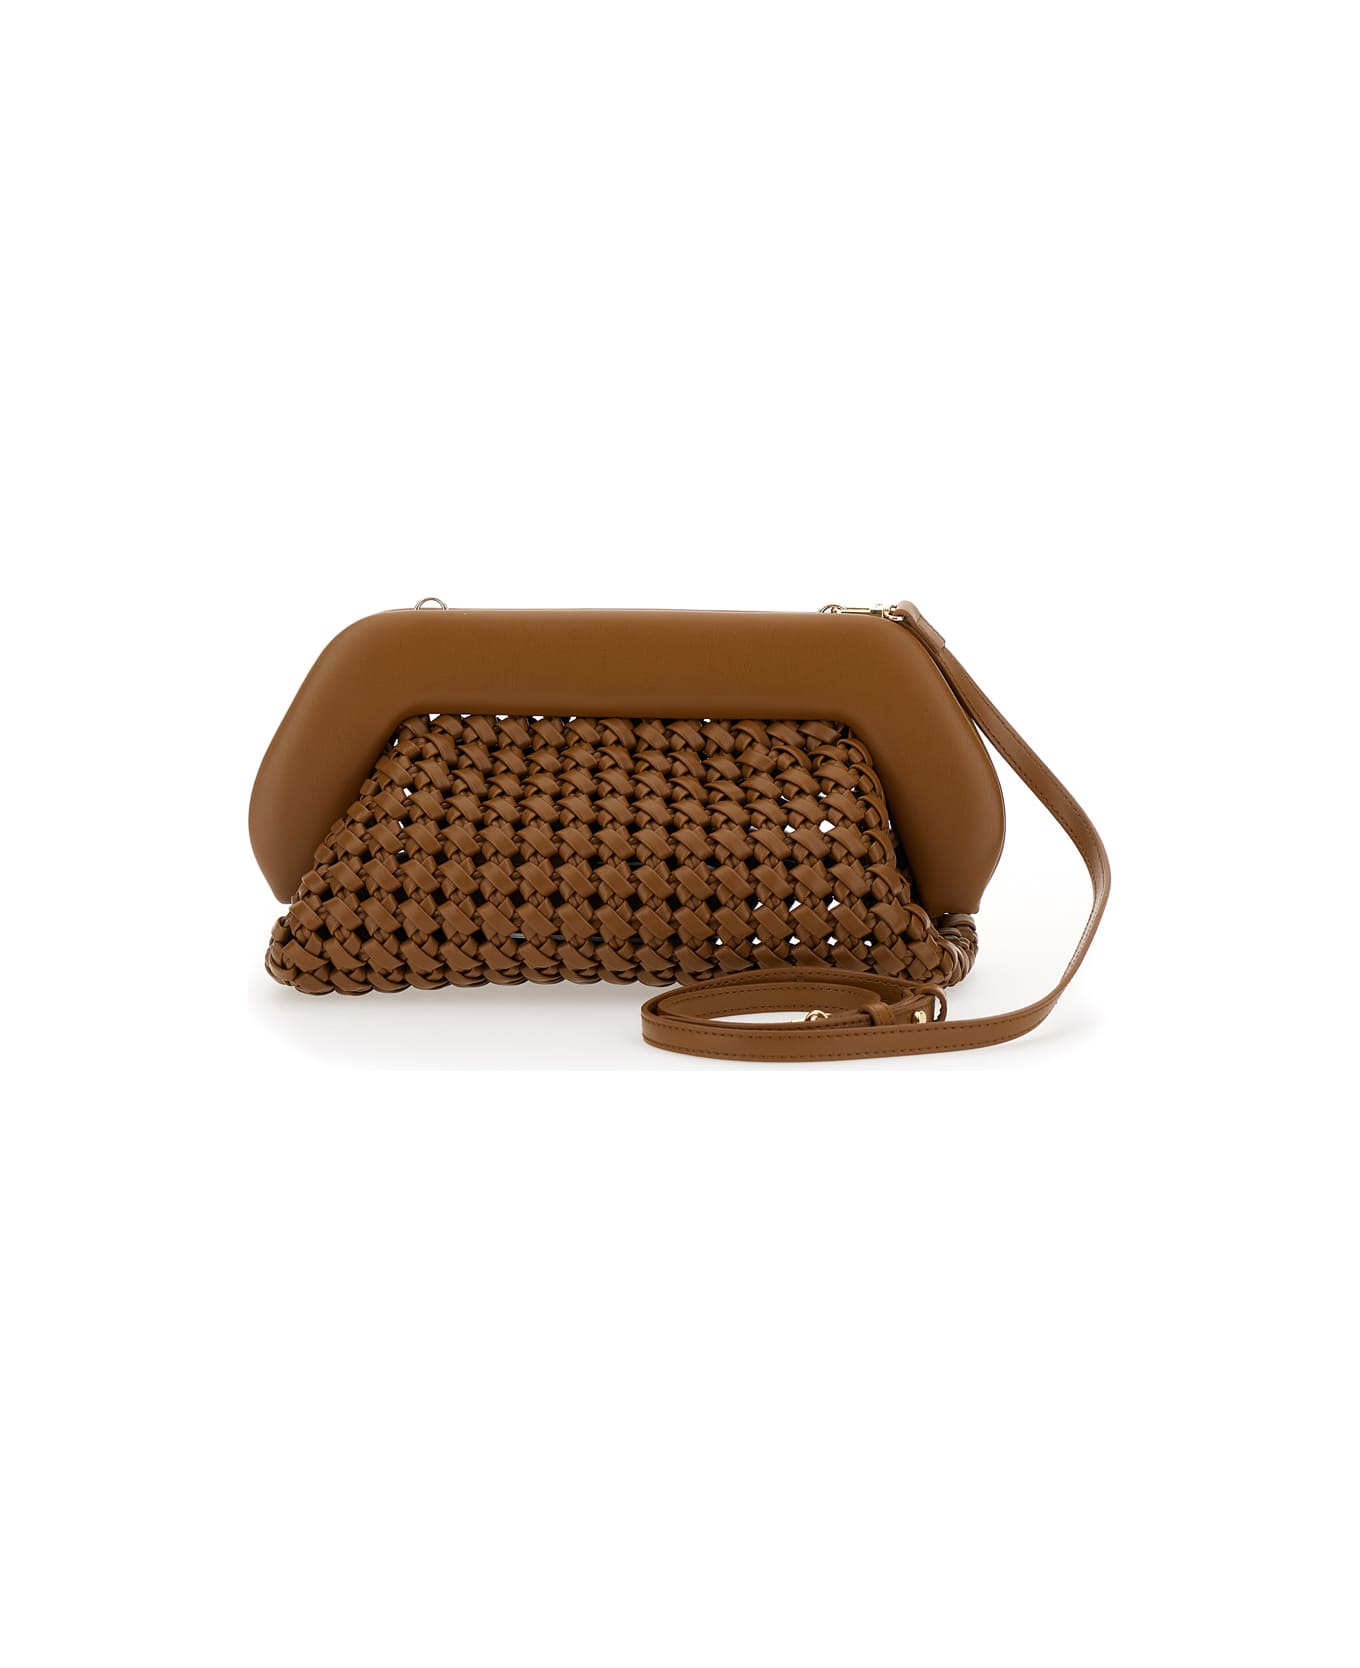 THEMOIRè 'bios Knots' Brown Clutch Bag With Braided Design In Eco Leather Woman - Brown